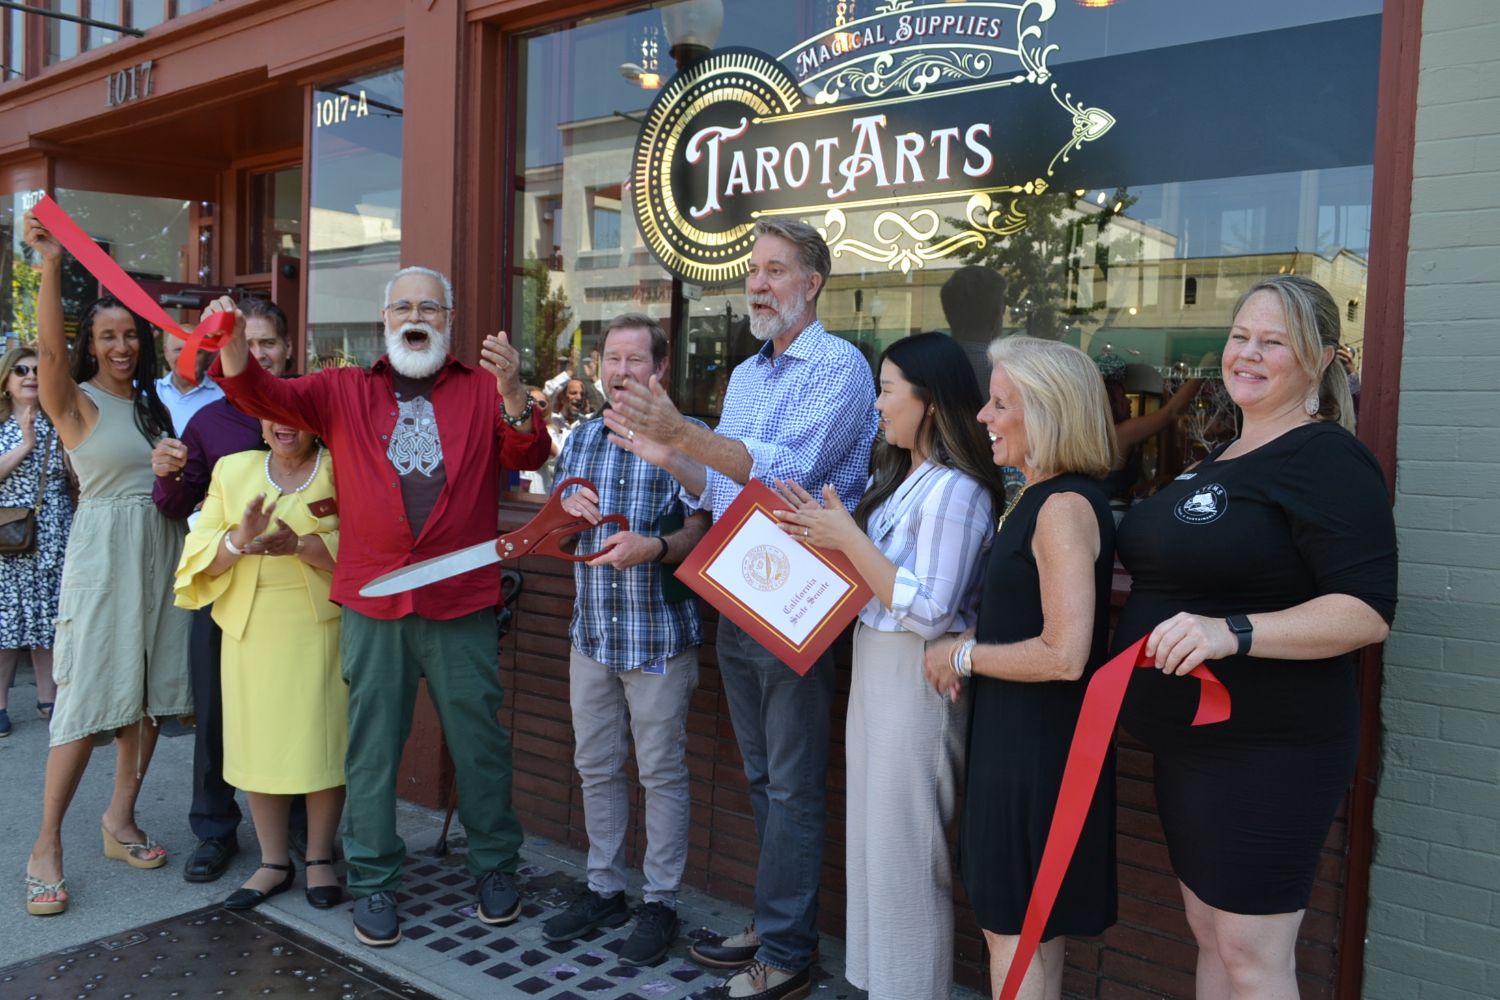 PHOTO: Alisa Hayashida | The South Pasadenan | Tarot Arts celebrates its grand opening with a ribbon cutting. Pictured l-r: Chamber Board Member Karla Thompson, City Councilmember Evelyn Zniemer, City Councilmember Michael Cacciotti, Tarot Arts owner Willaim Toro, Mayor Jon Primuth, Tarot Arts owner Phillip Gibson, Erica Nam from Anthony Portantino's office, City Councilmember Janet Braun, and Chamber Ambassador Chantal Garcia.